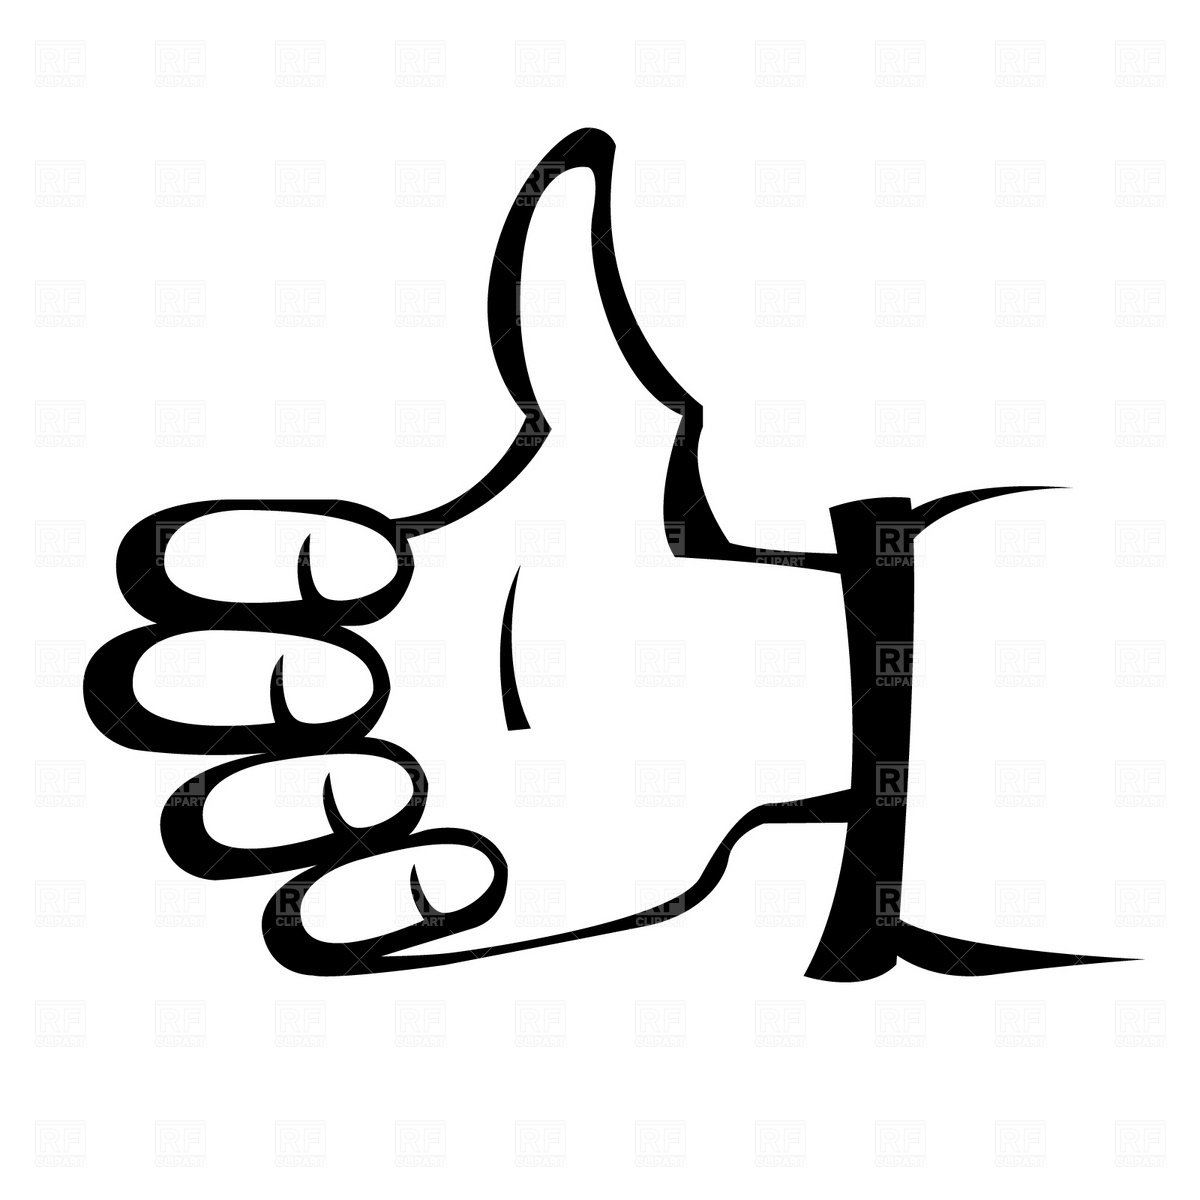 Thumbs up sign, Icons and Emblems, download Royalty-free vector ...